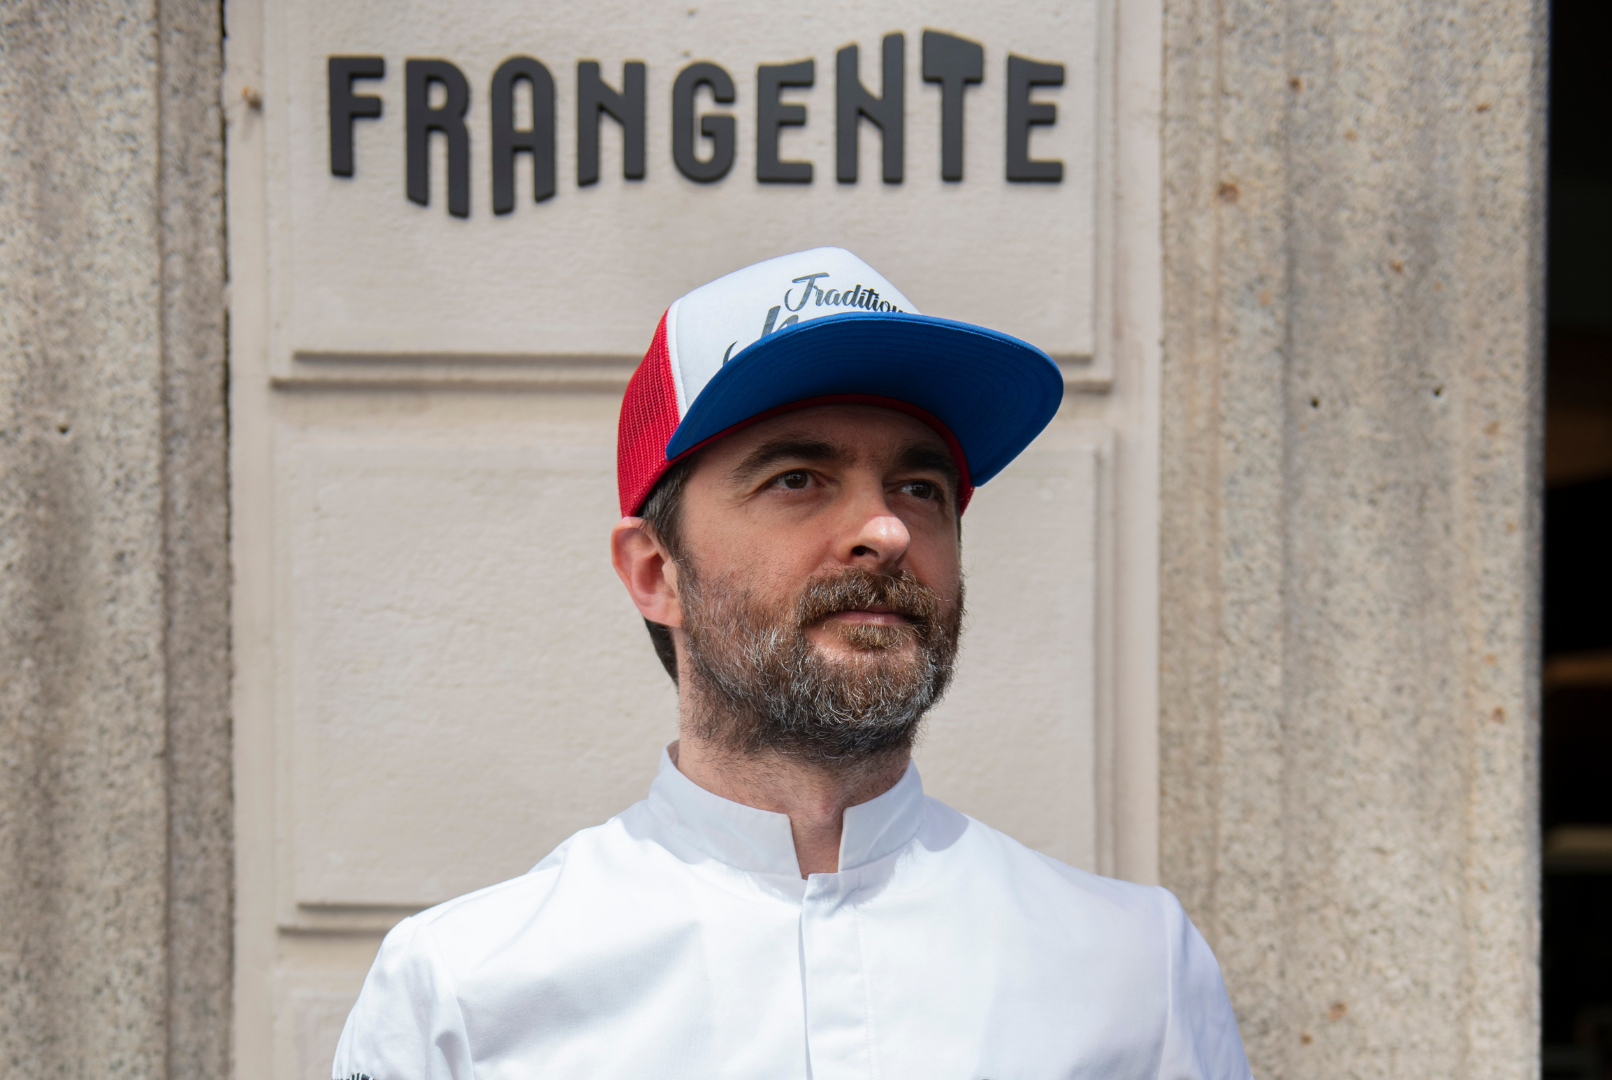 Safety and sustainability lie at the heart of a “state-of-the-art restaurant”: Frangente Milano